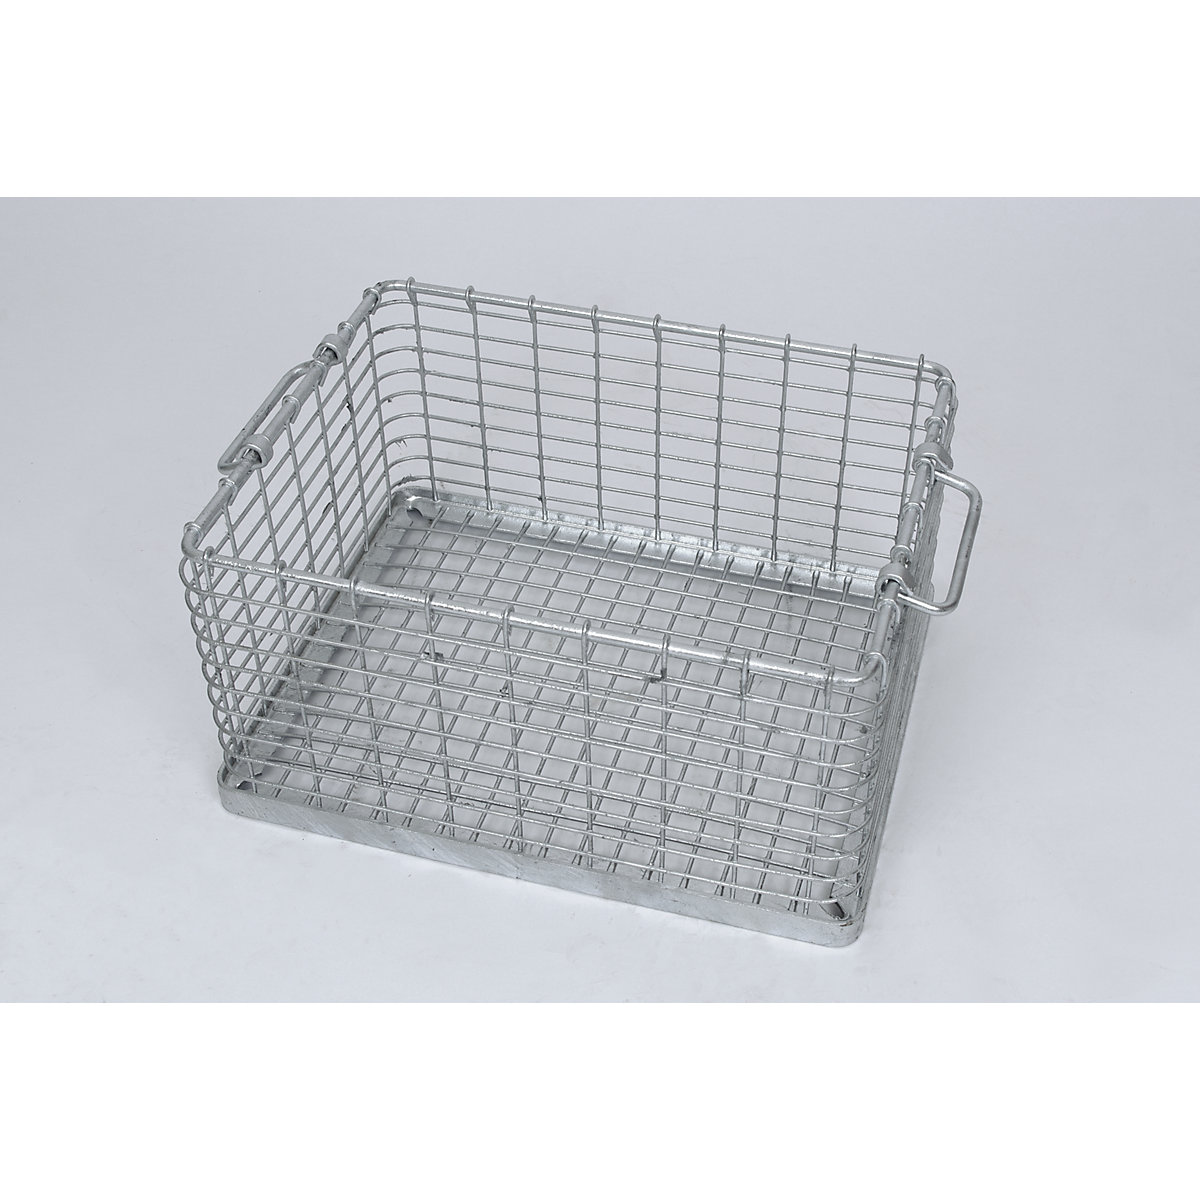 Stacking basket for heavy items, large mesh size, external dims. LxWxH 515 x 405 x 300 mm-8